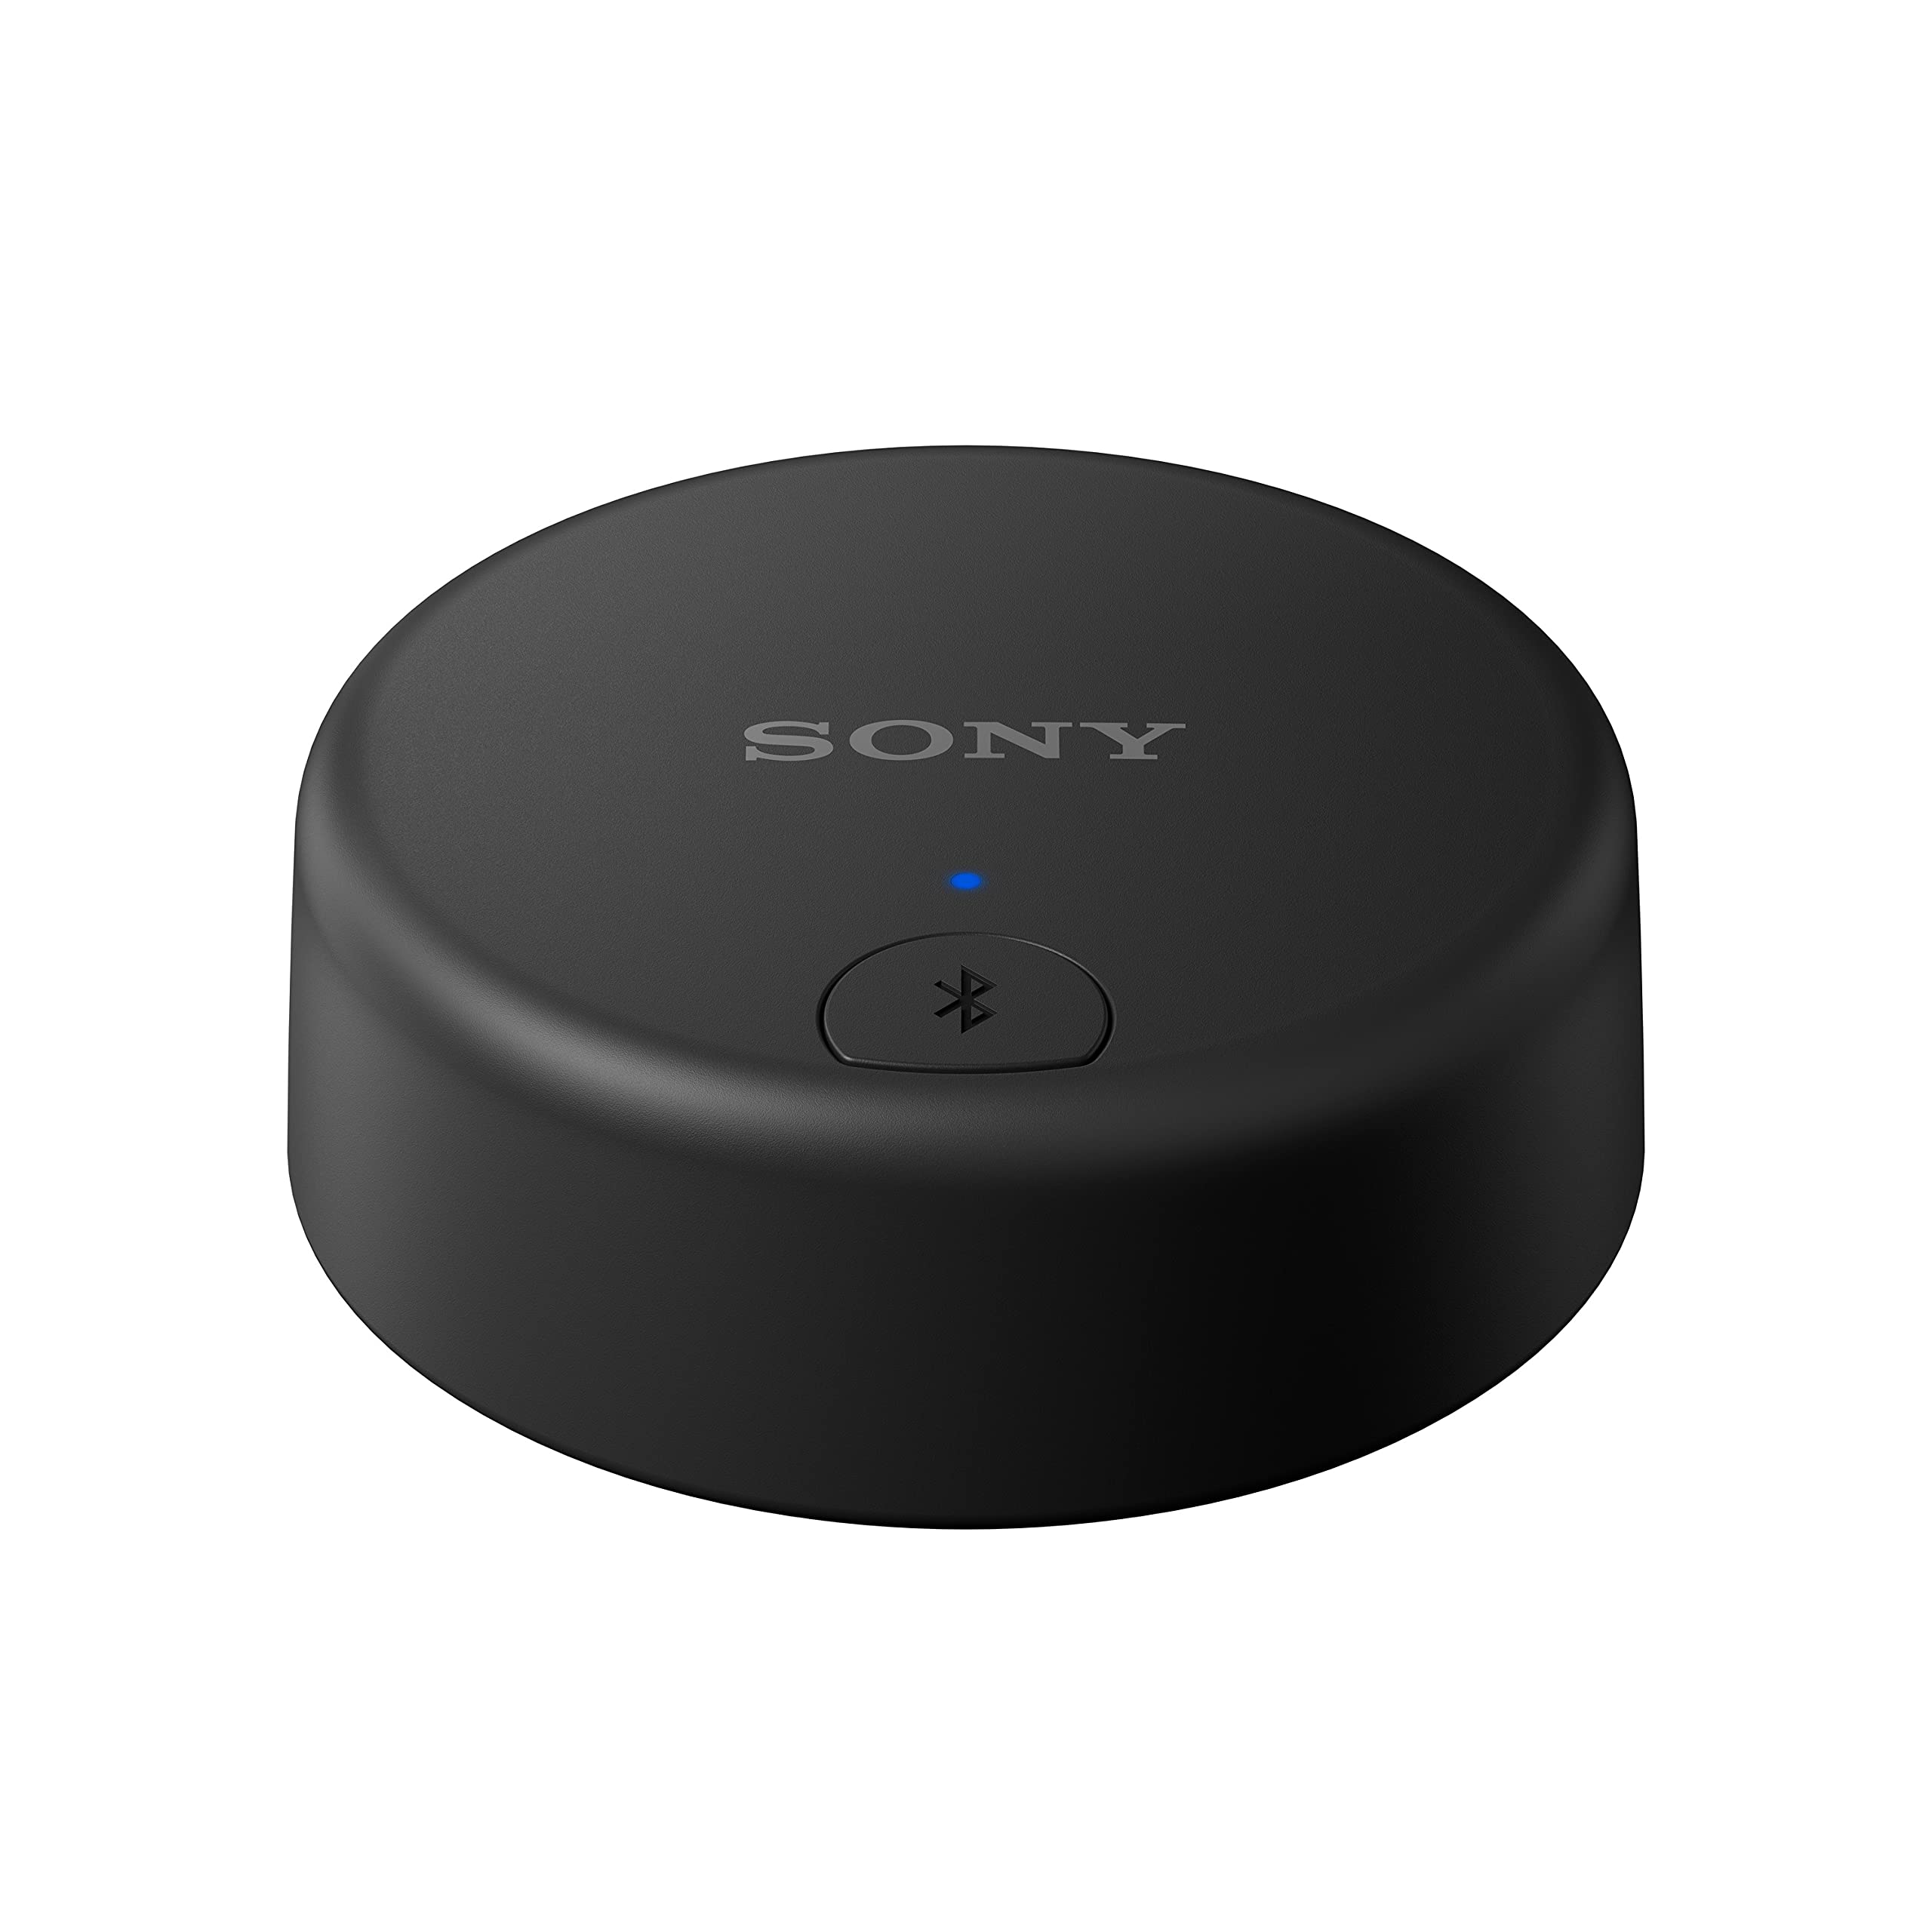 Sony WLA-NS7 Wireless TV Adapter for TV Watching Compatible with Most Wireless Headphones and Neckband Speakers